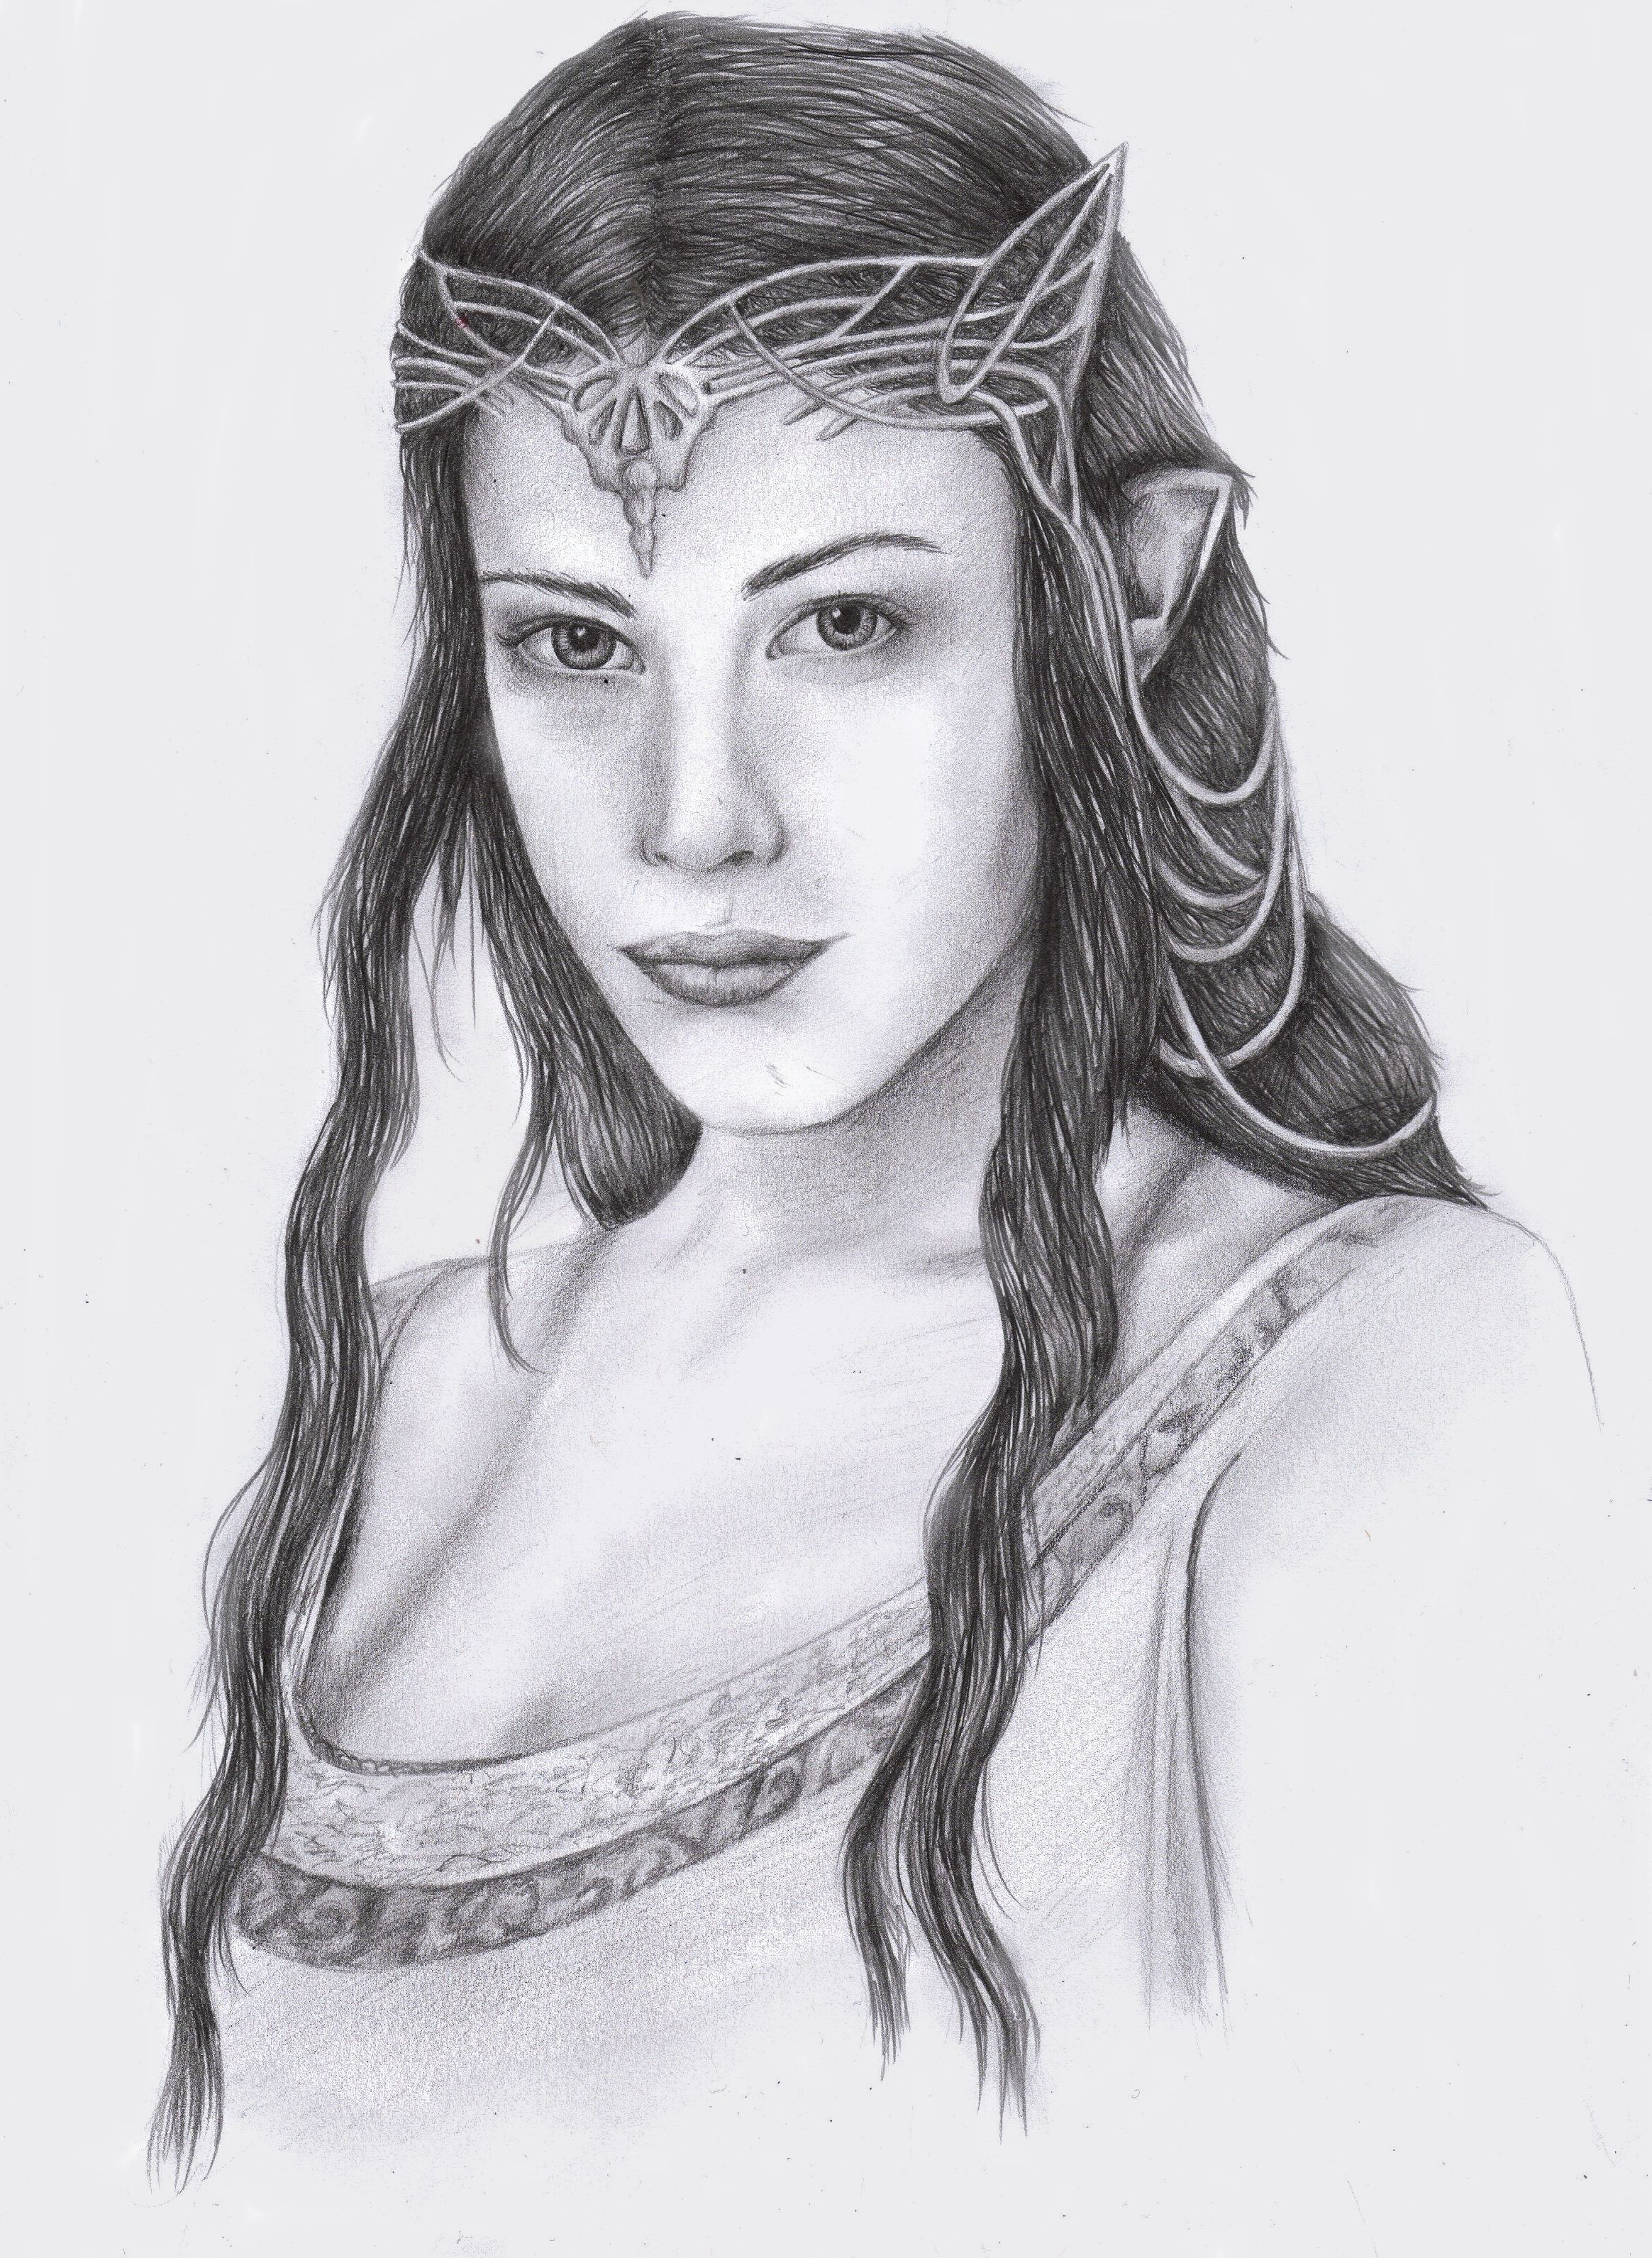 Liv Tyler/Arwen from lord of the rings by ilikeyourdad on DeviantArt